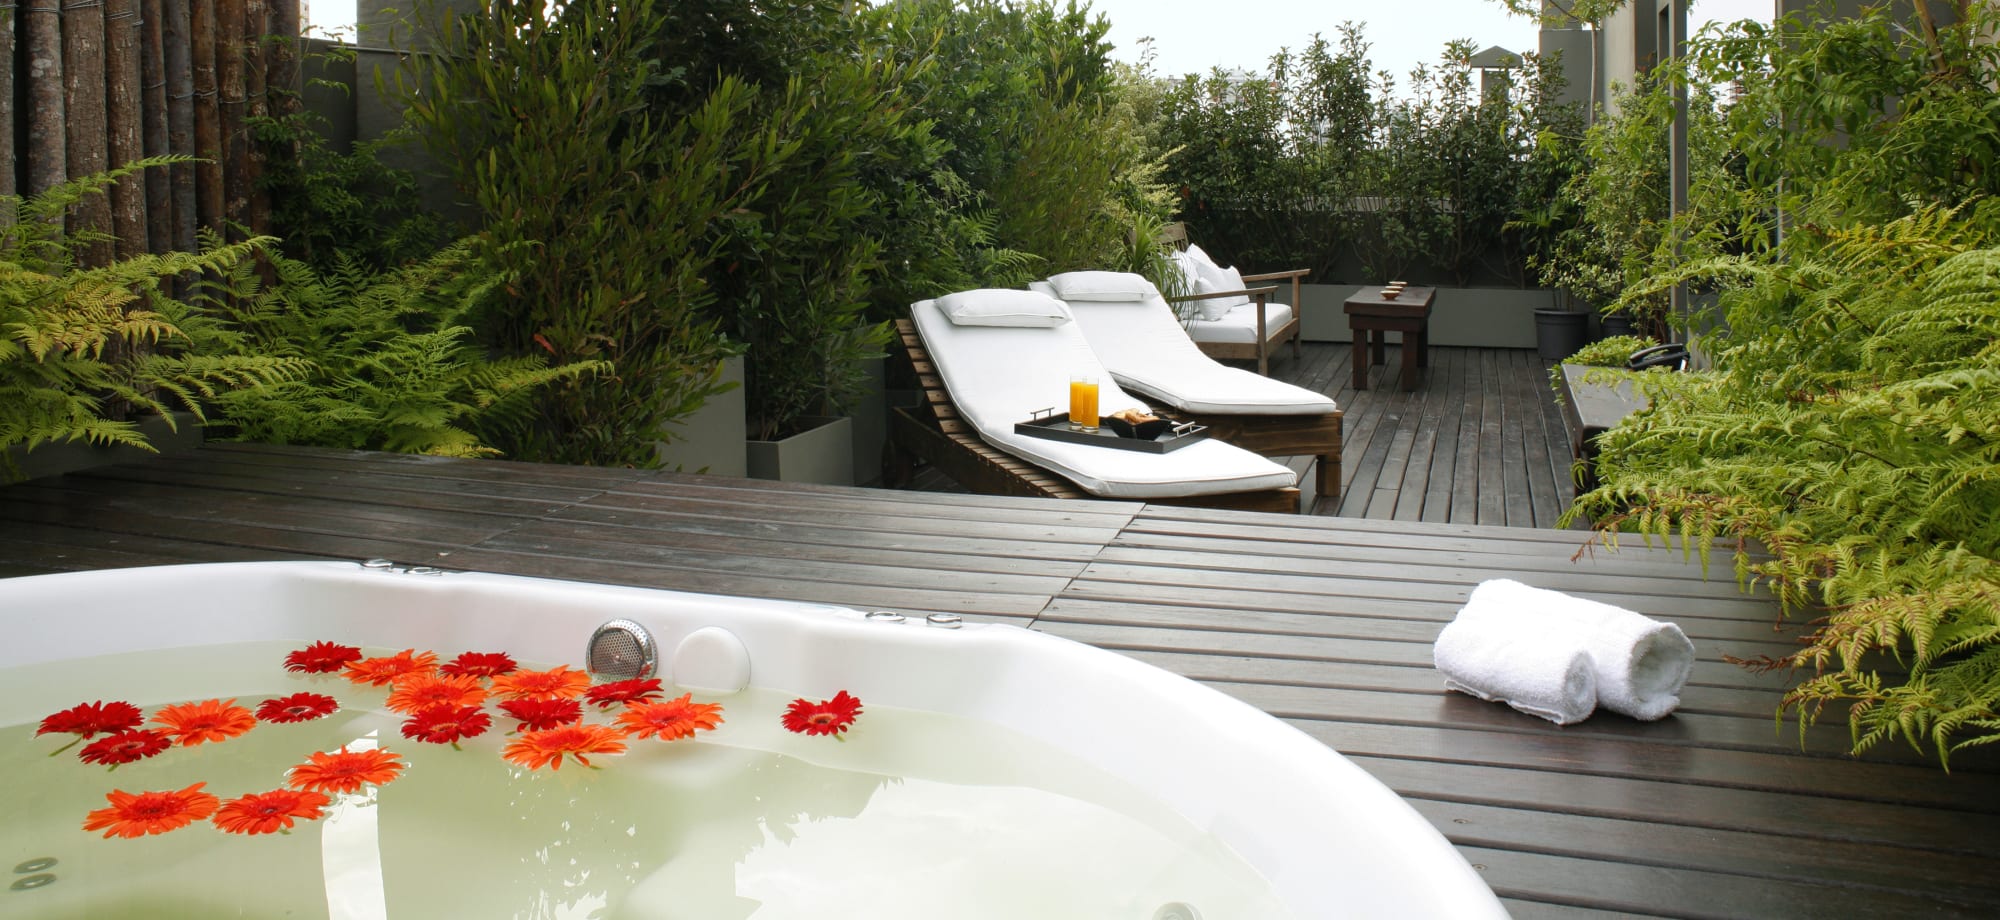 Legado Mitico terrace has a whirlpool bathtub with flowers floating on its surface and deck chairs surrounded by plants. 